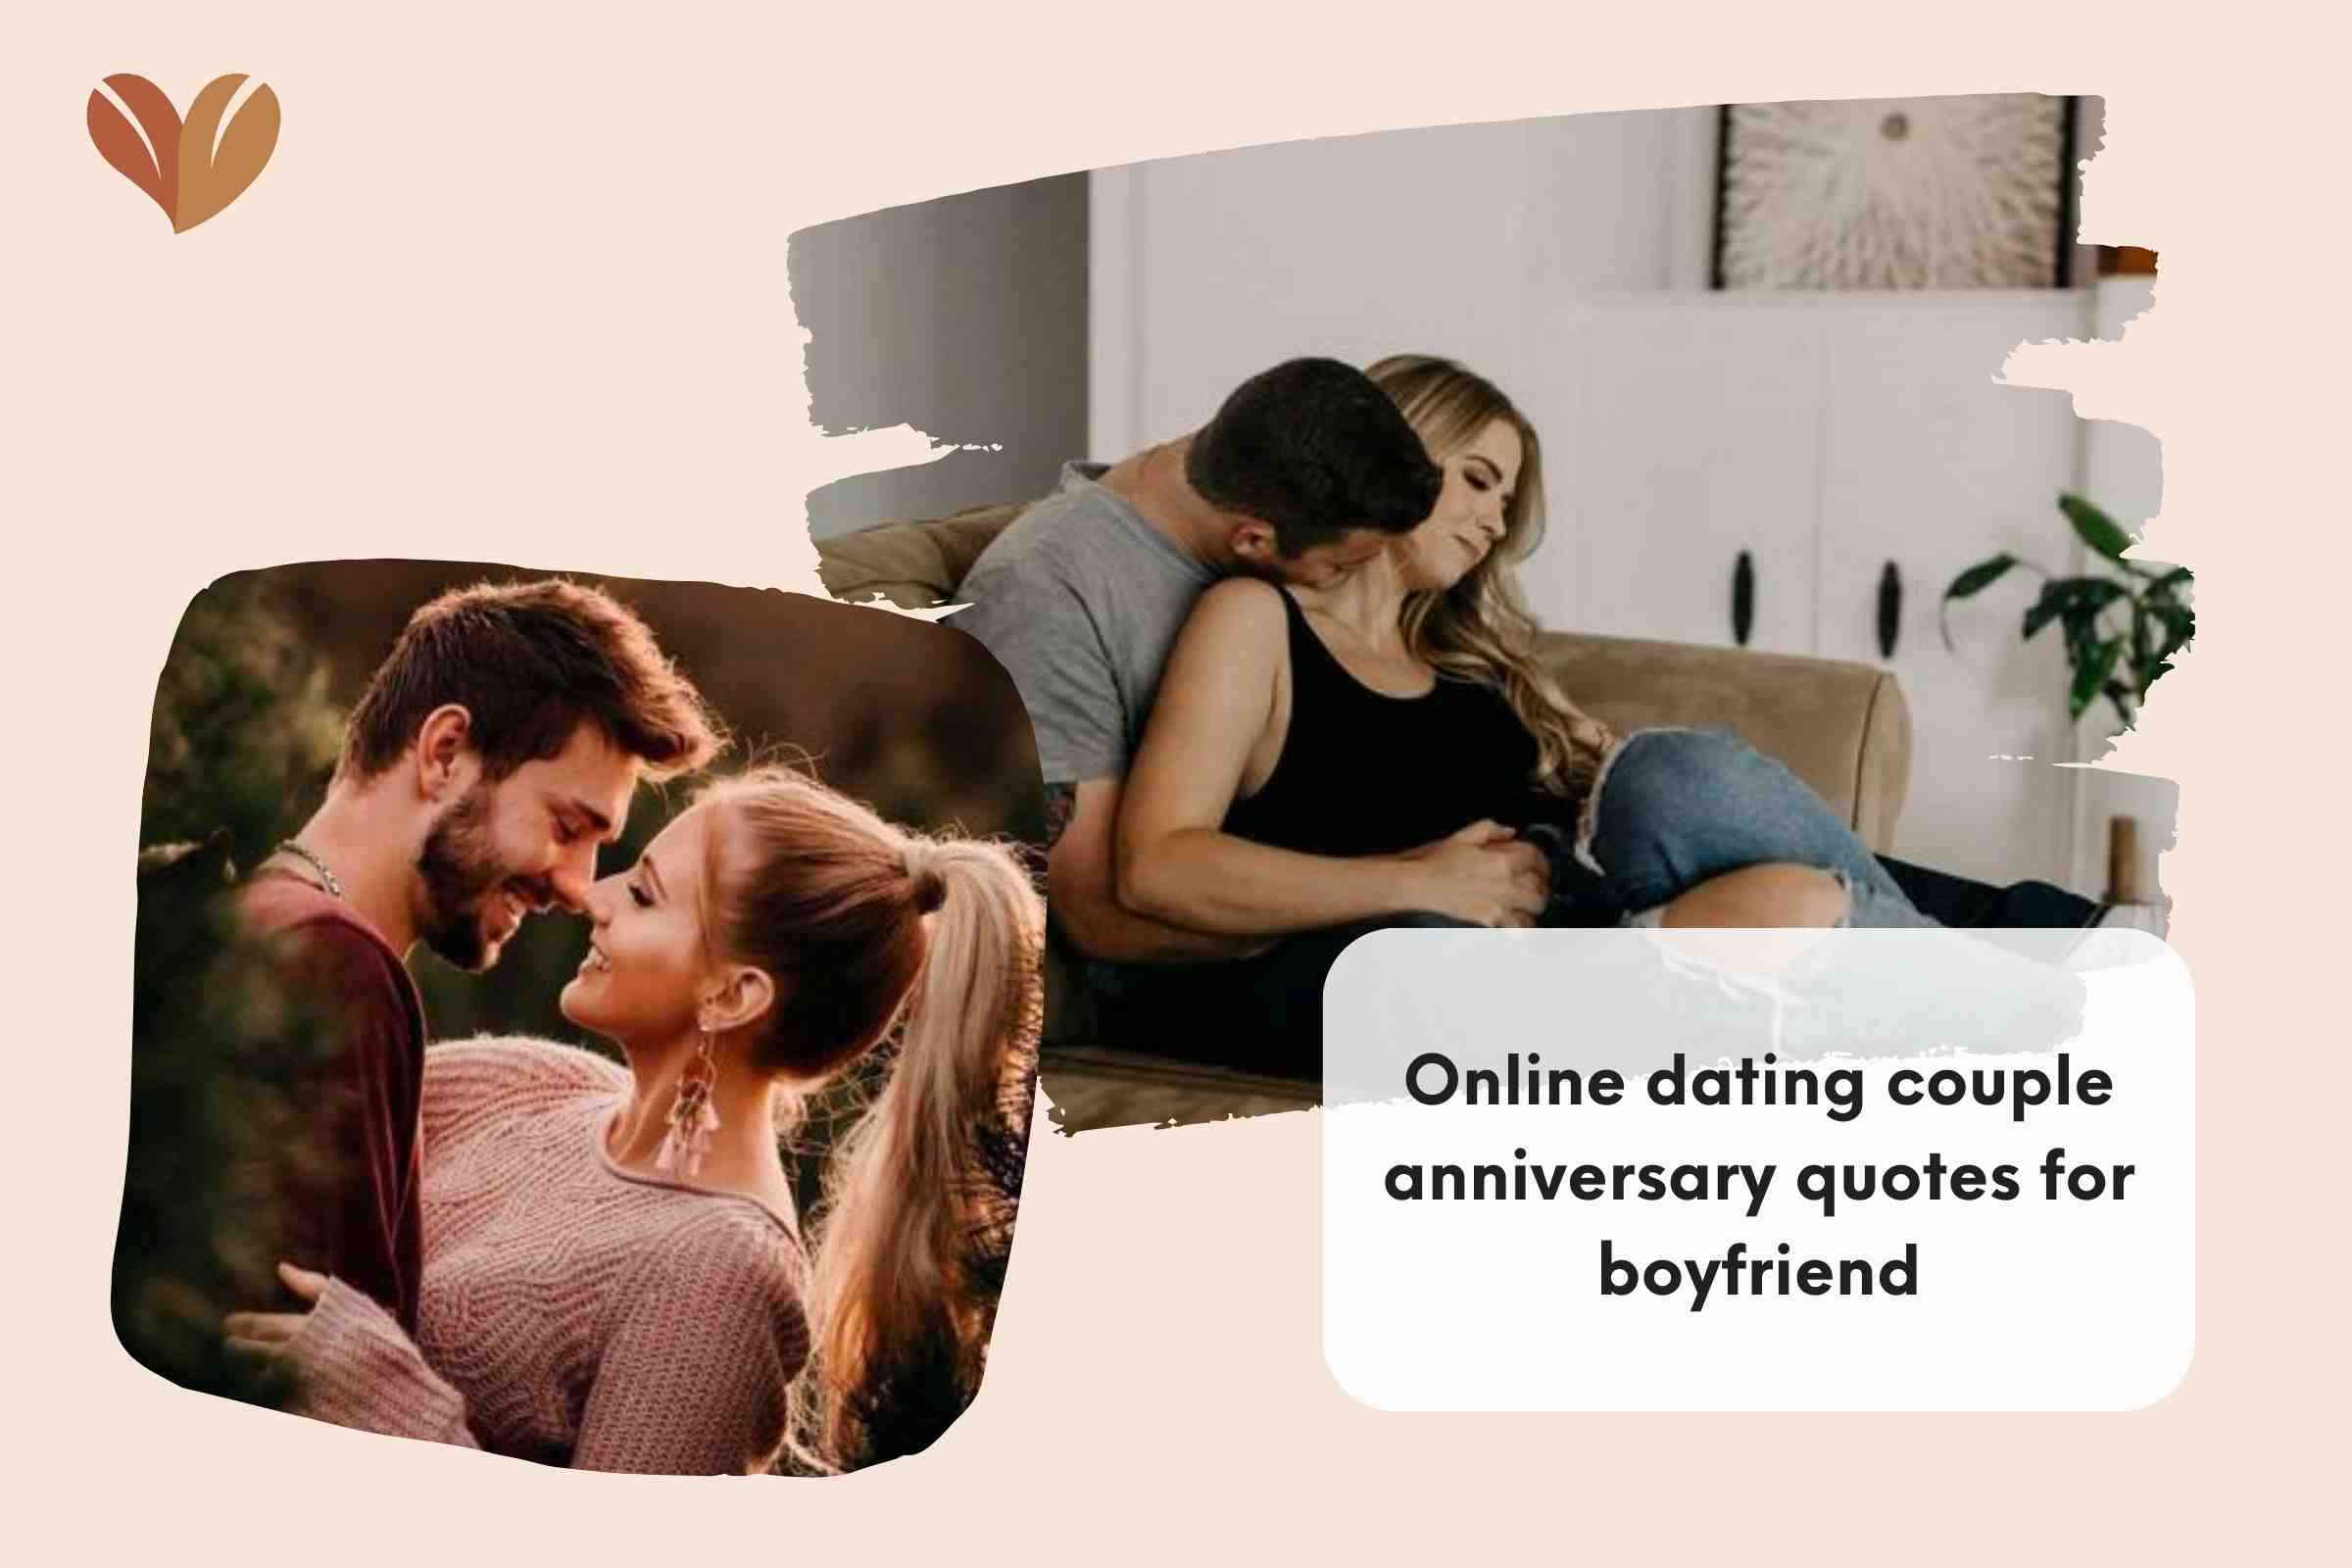 Online dating couple anniversary quotes for boyfriend